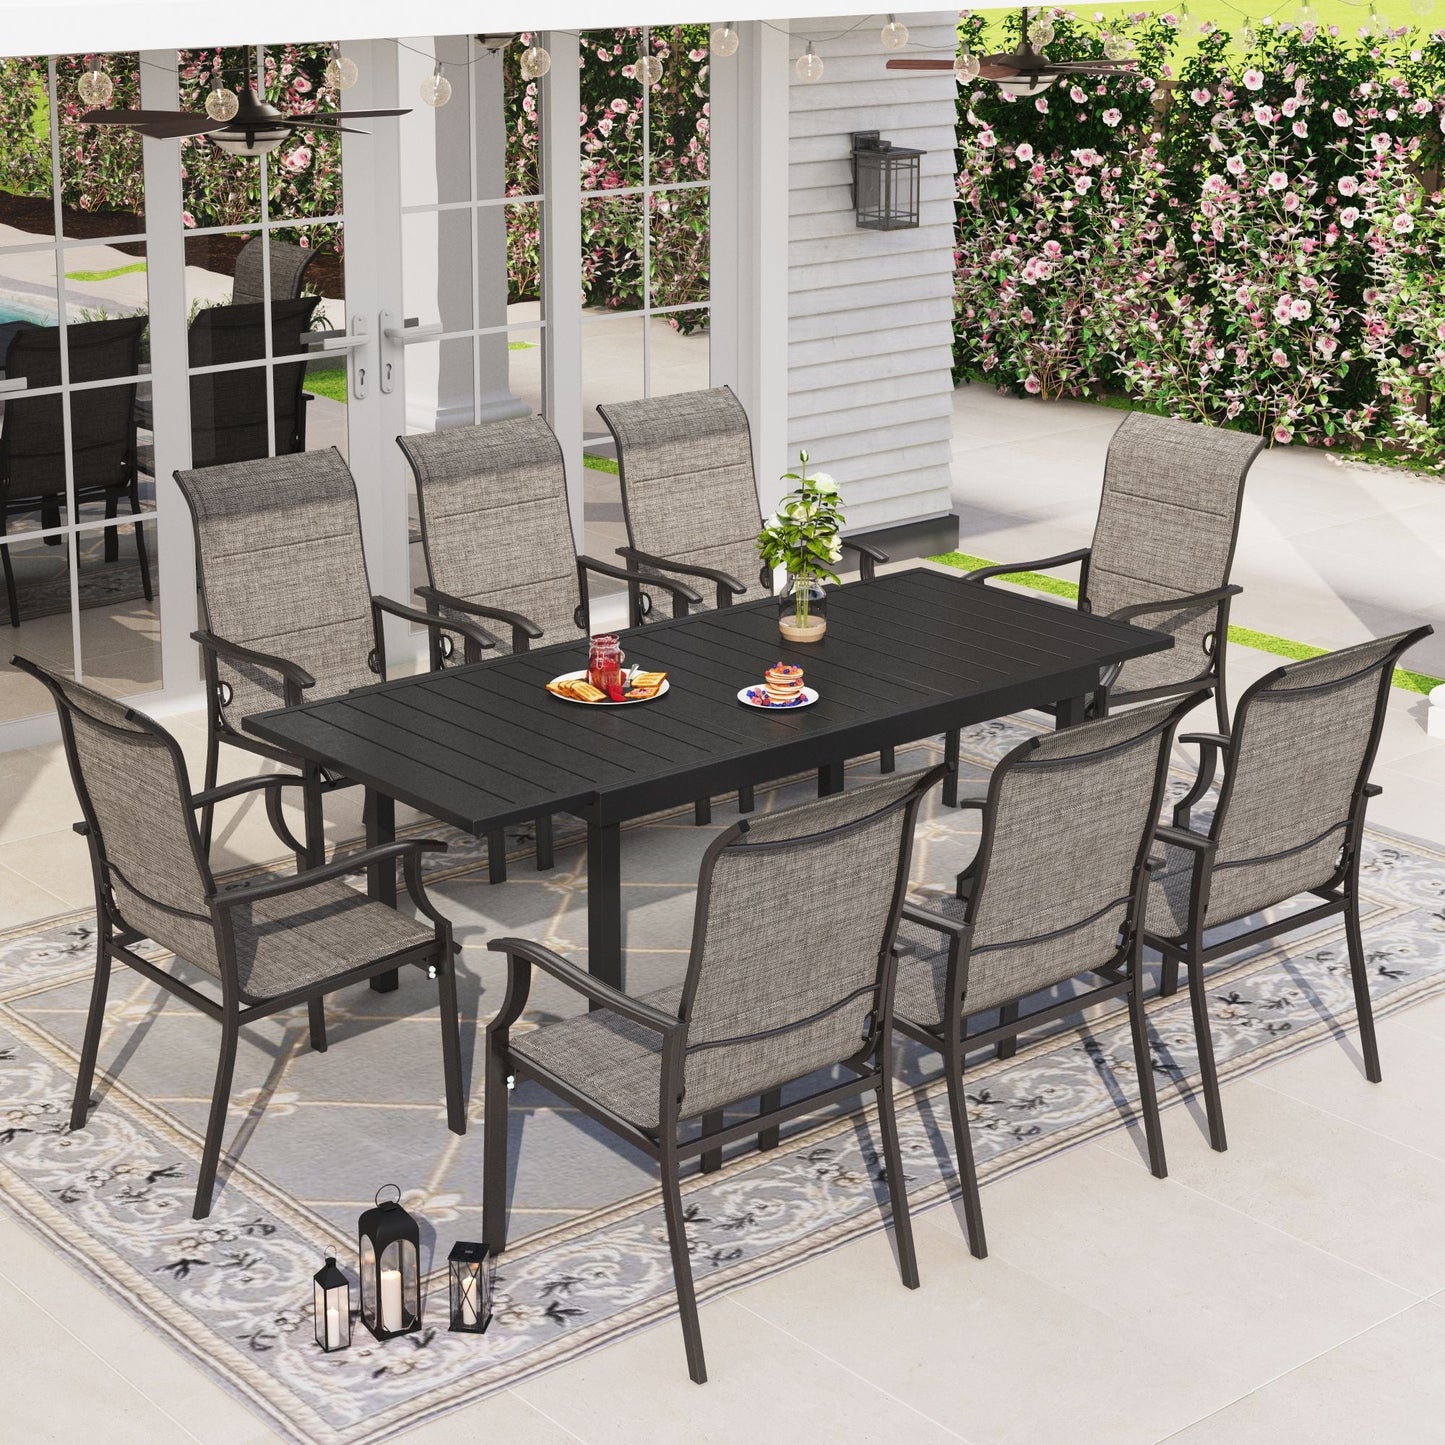 Sophia & William 9 Pieces Metal Patio Dining Set for 8 Outdoor Textilene Chairs Table Set